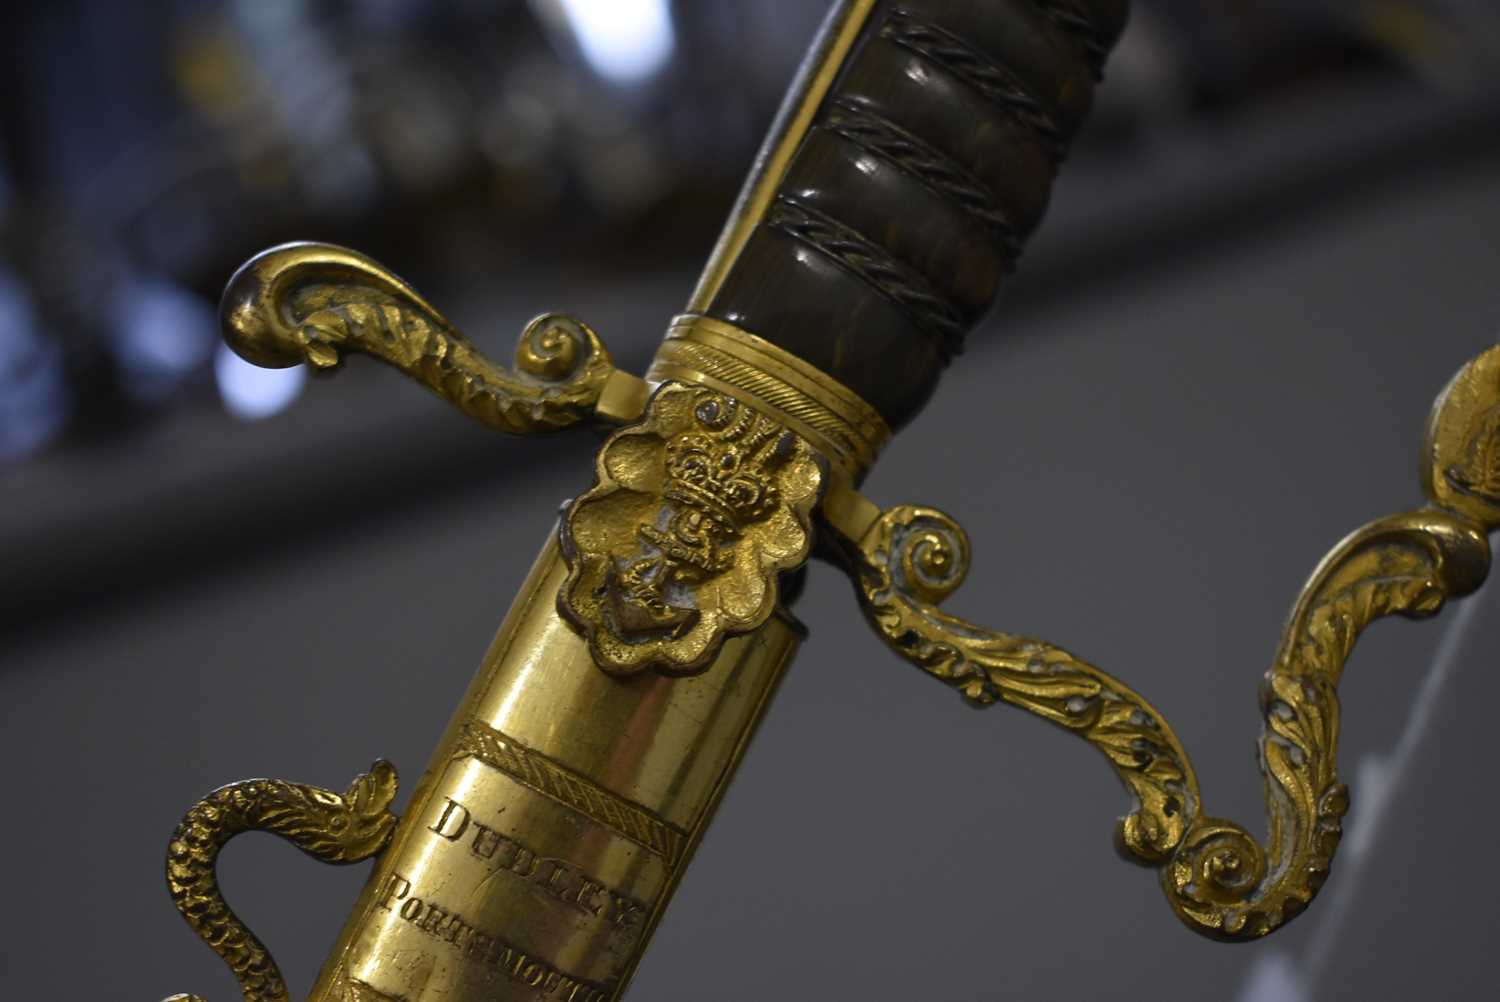 AN ORNATELY MOUNTED GEORGIAN NAVAL OFFICER'S SWORD, - Image 16 of 18